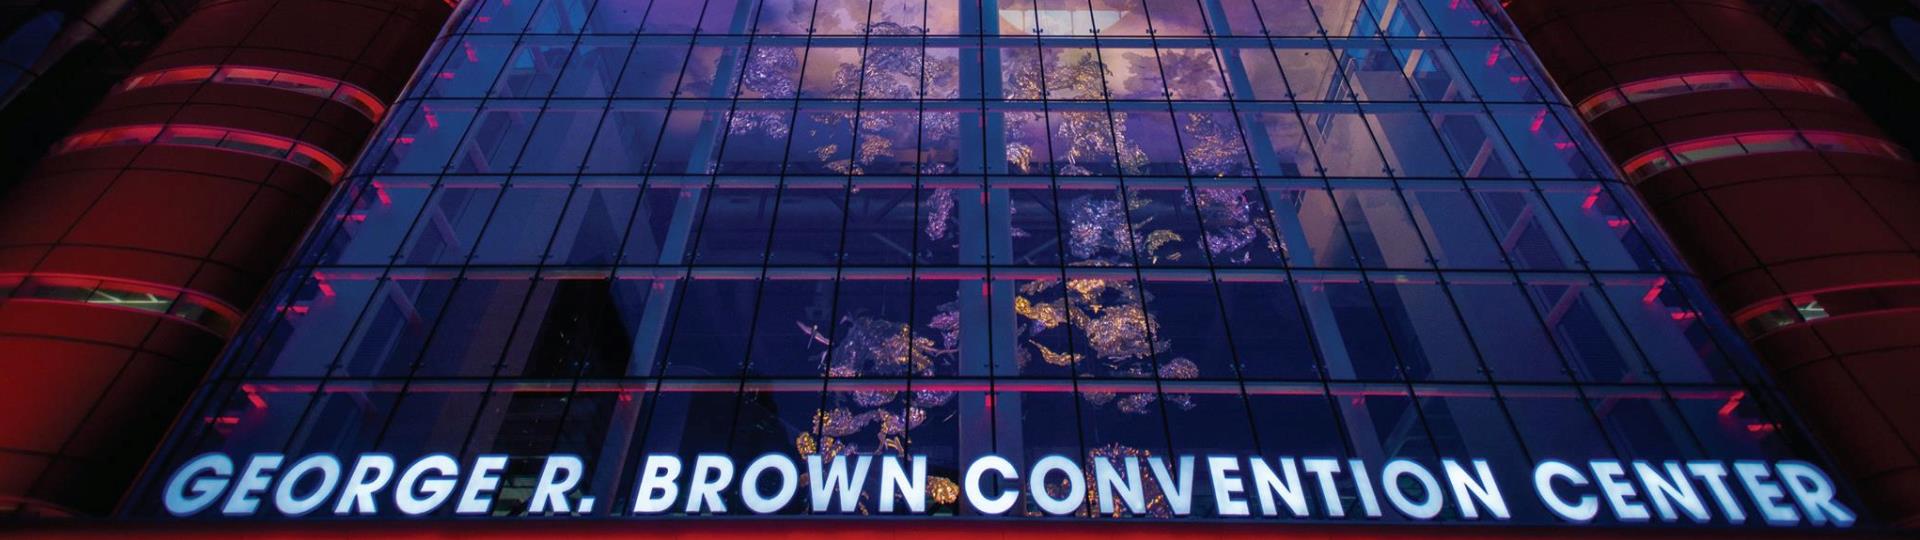 George R Brown Convention Center